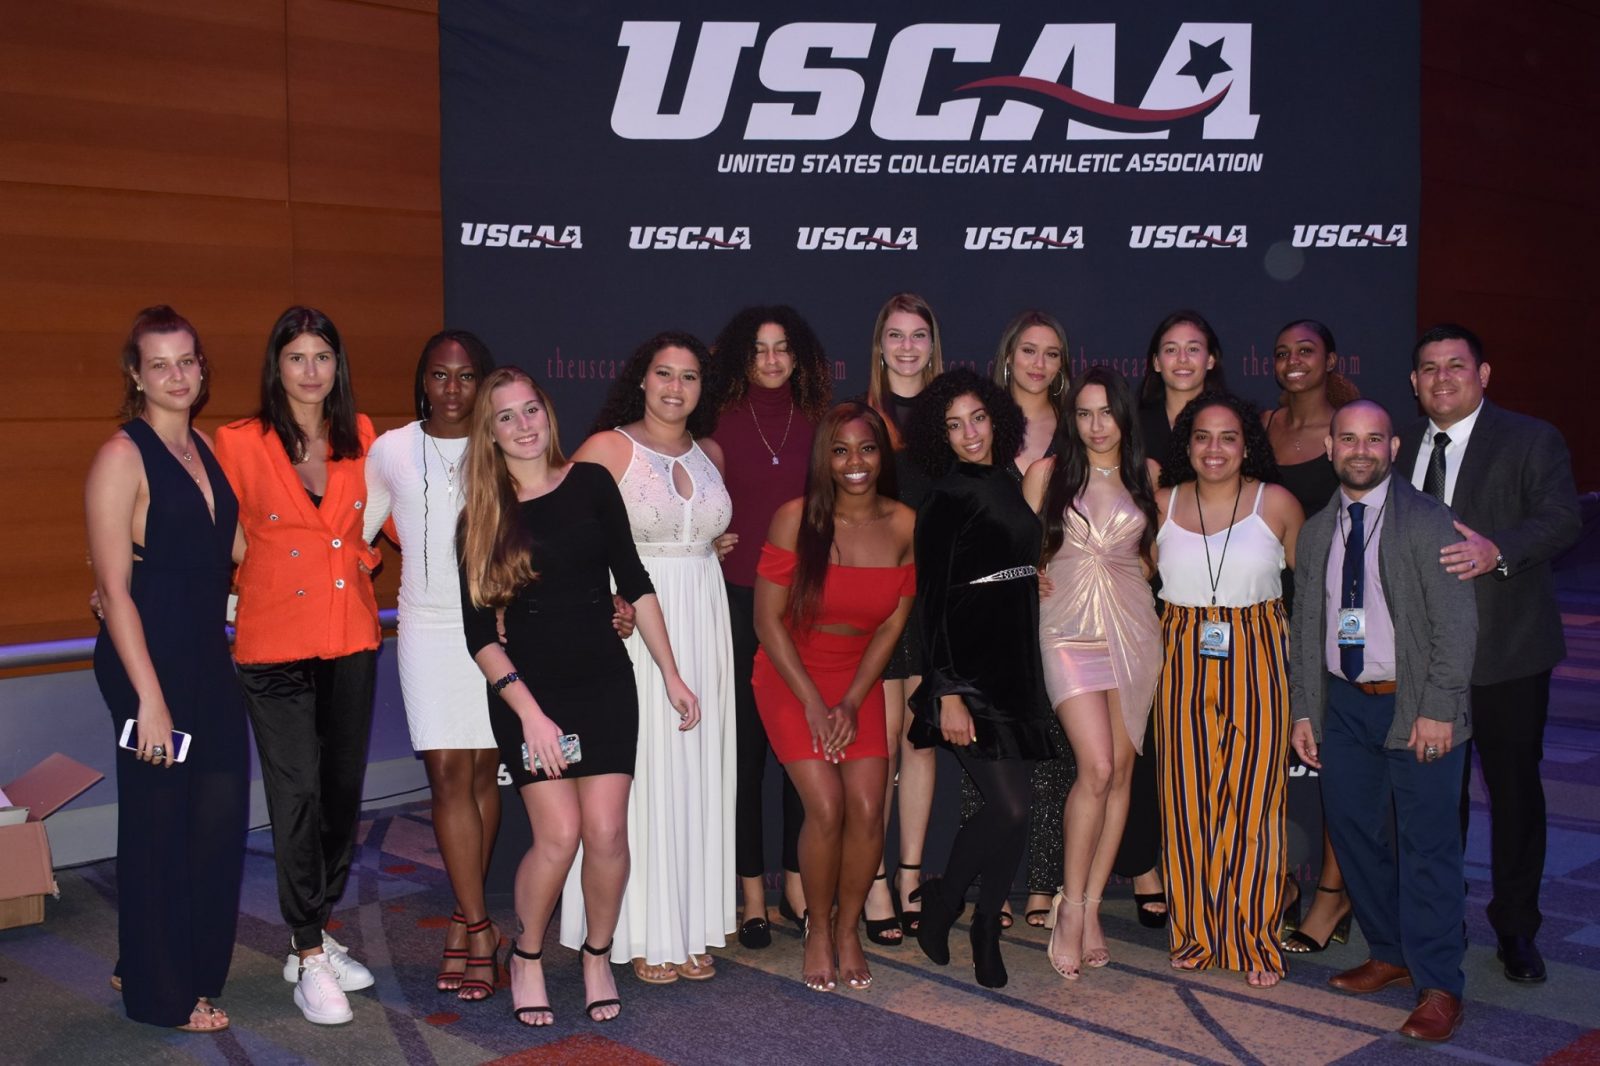 Women's Volleyball team at the USCAA Annual Banquet 